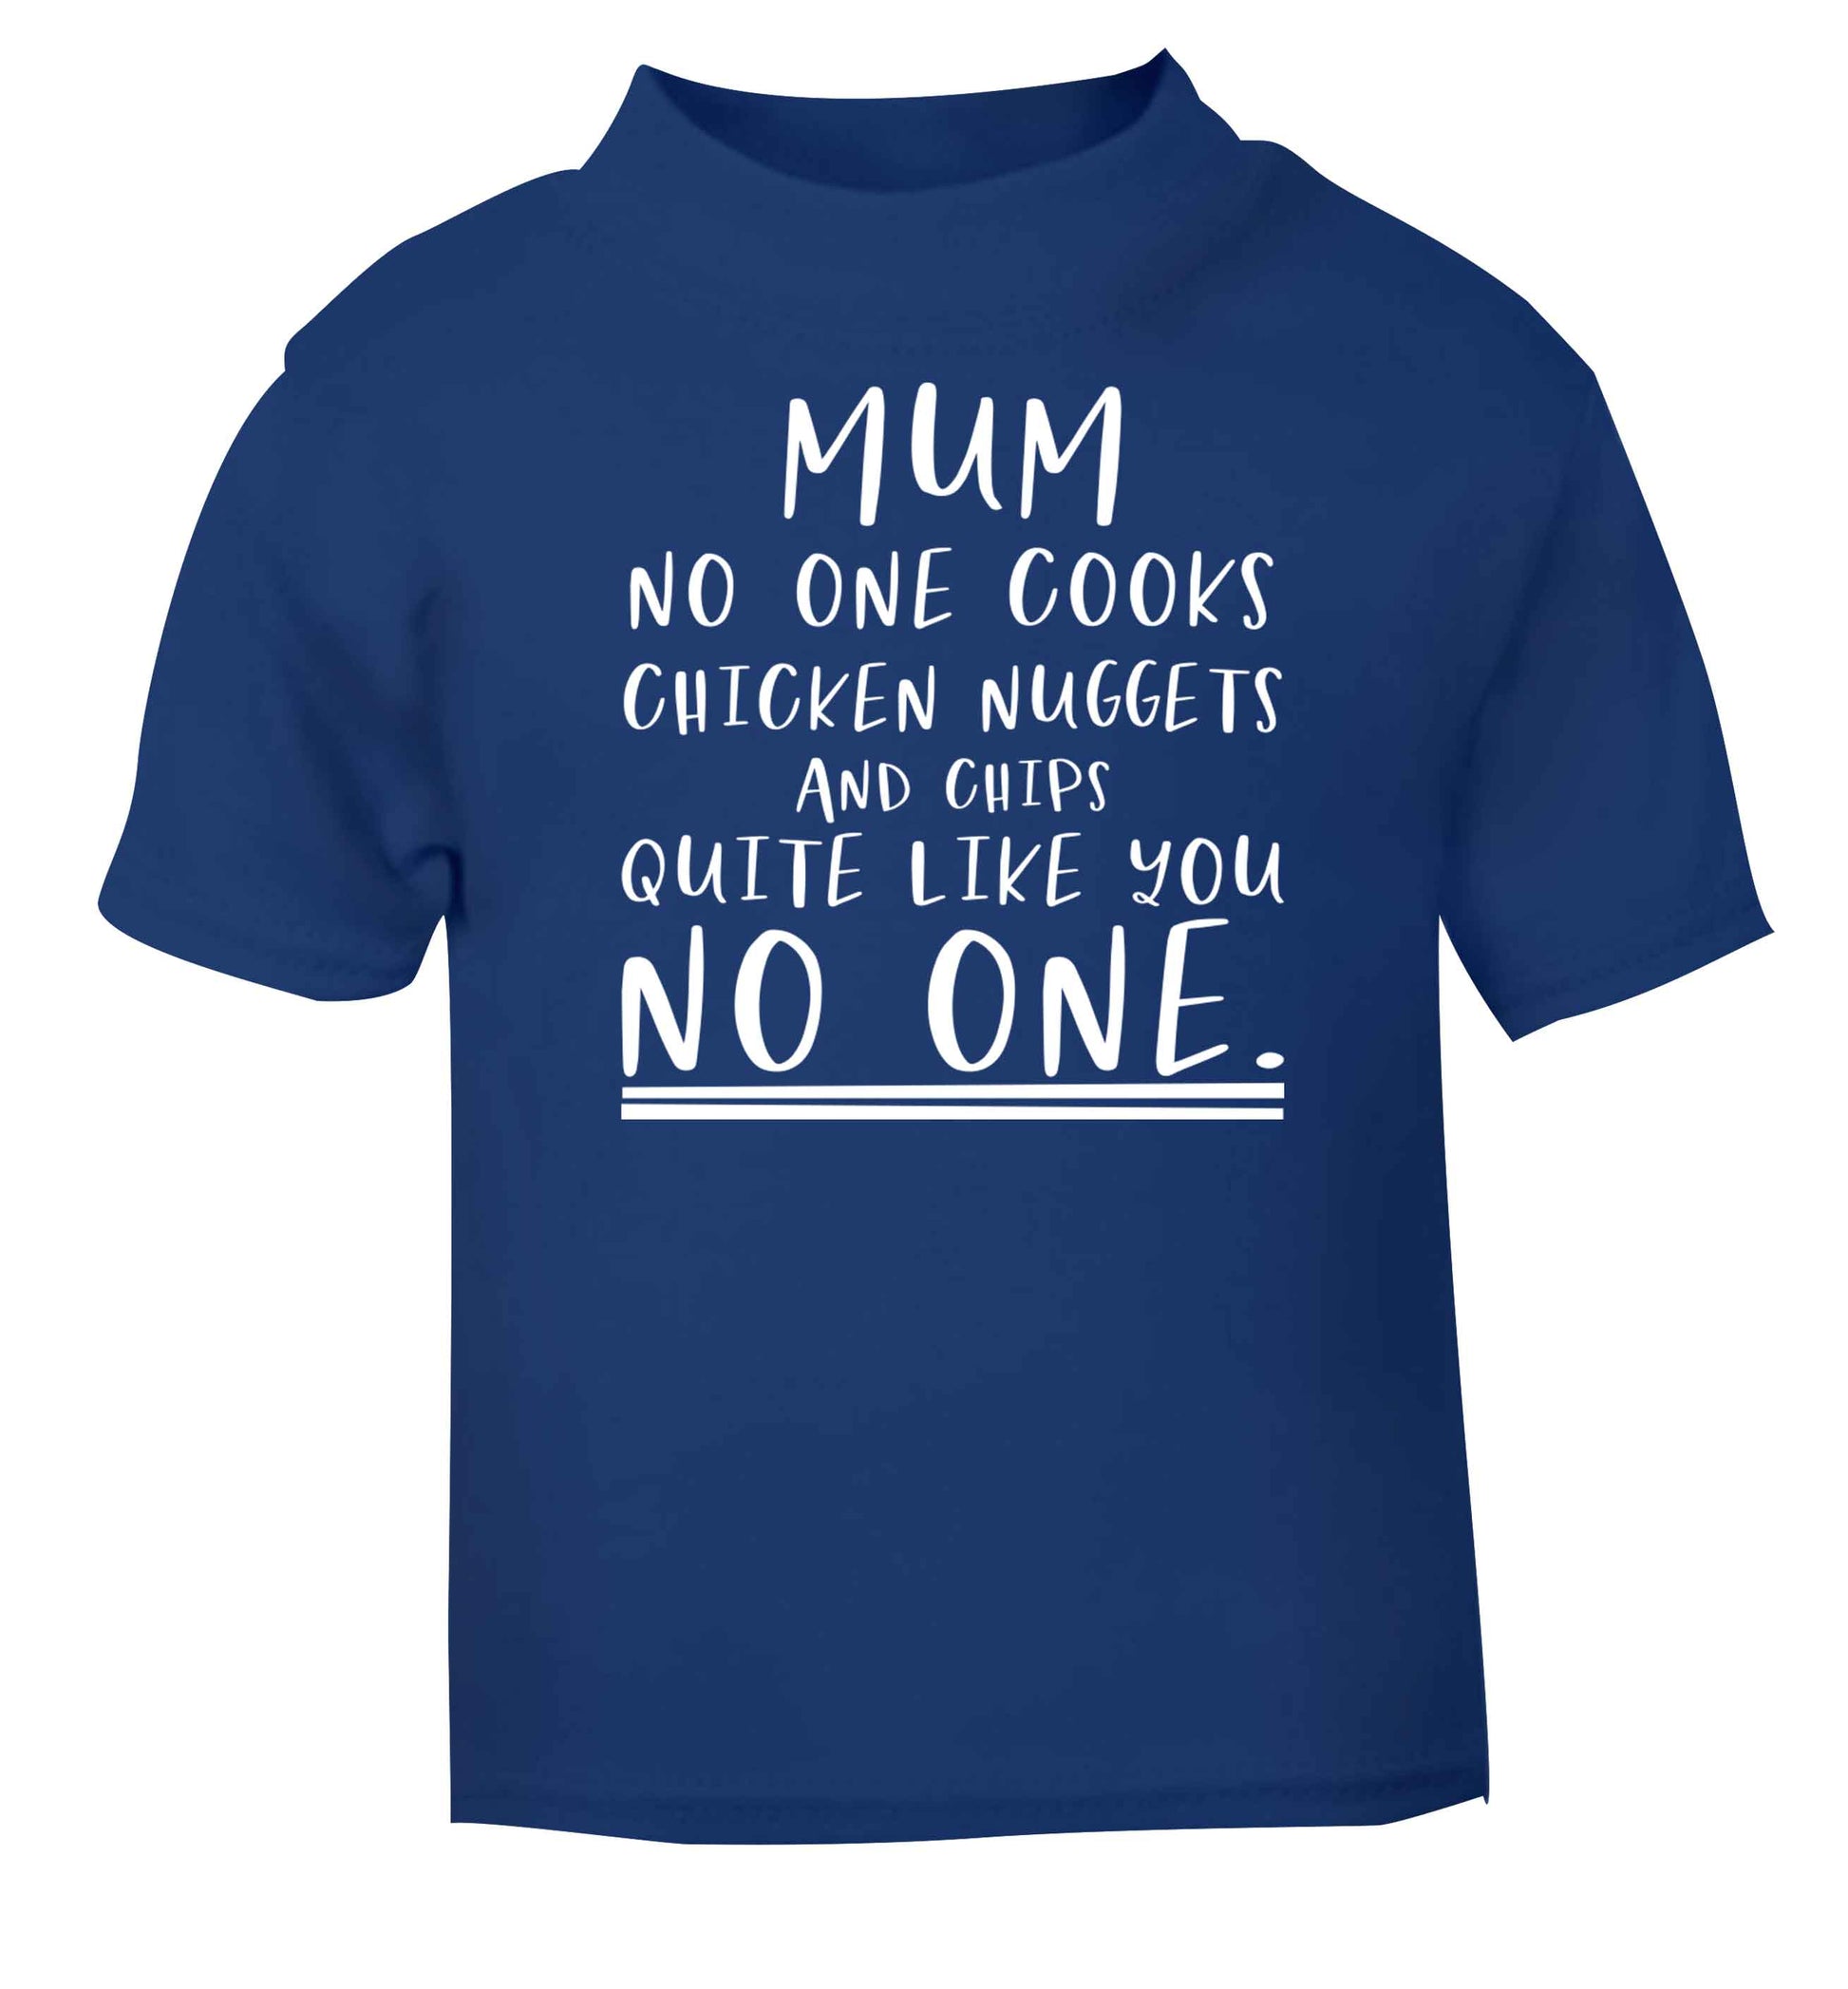 Super funny sassy gift for mother's day or birthday!  Mum no one cooks chicken nuggets and chips like you no one blue baby toddler Tshirt 2 Years